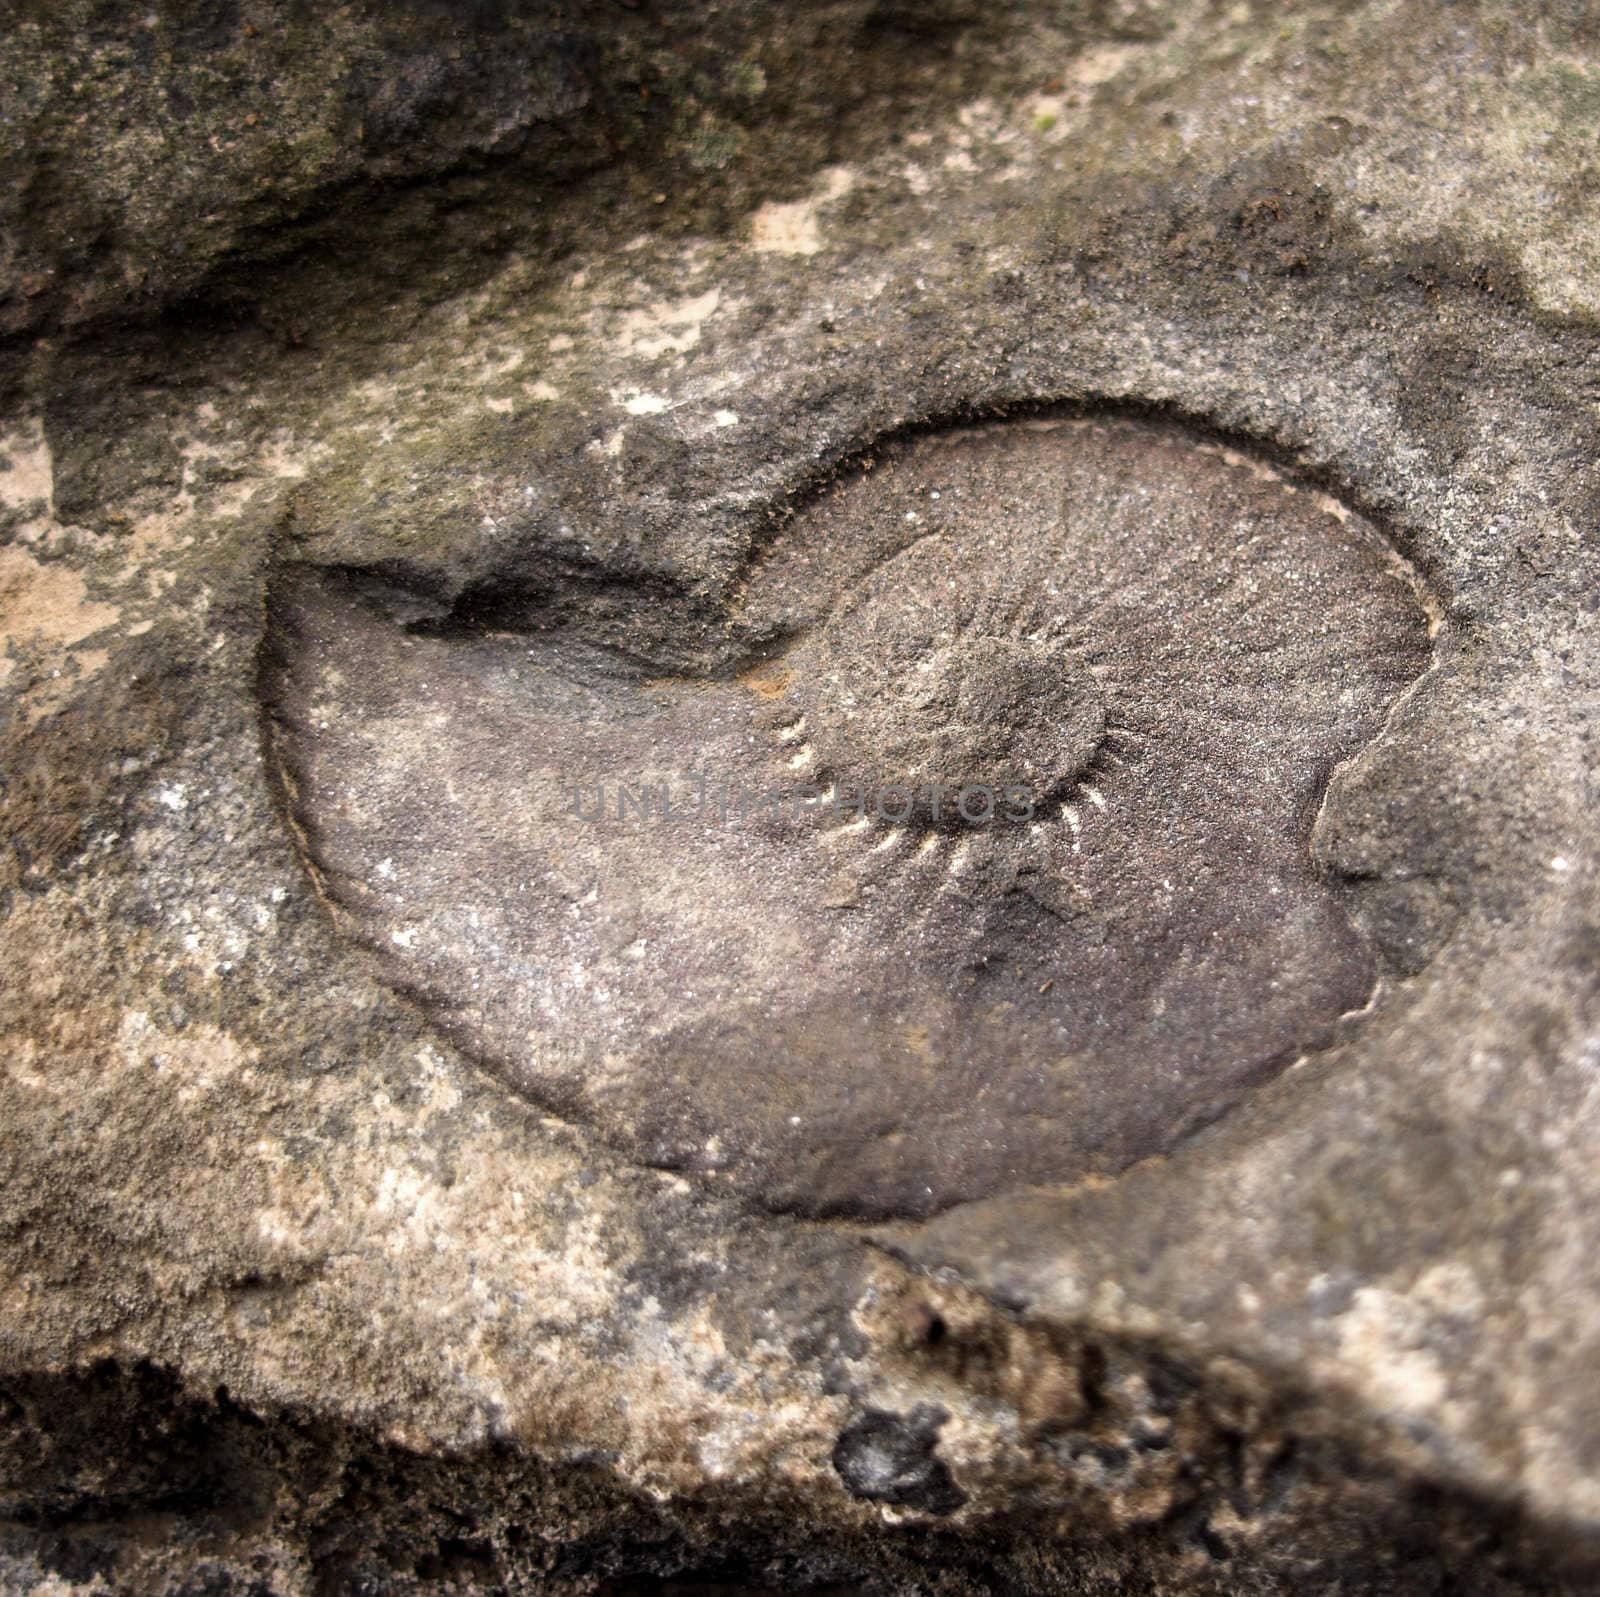 Macro photo of an ammonite fossil from Bulgaria